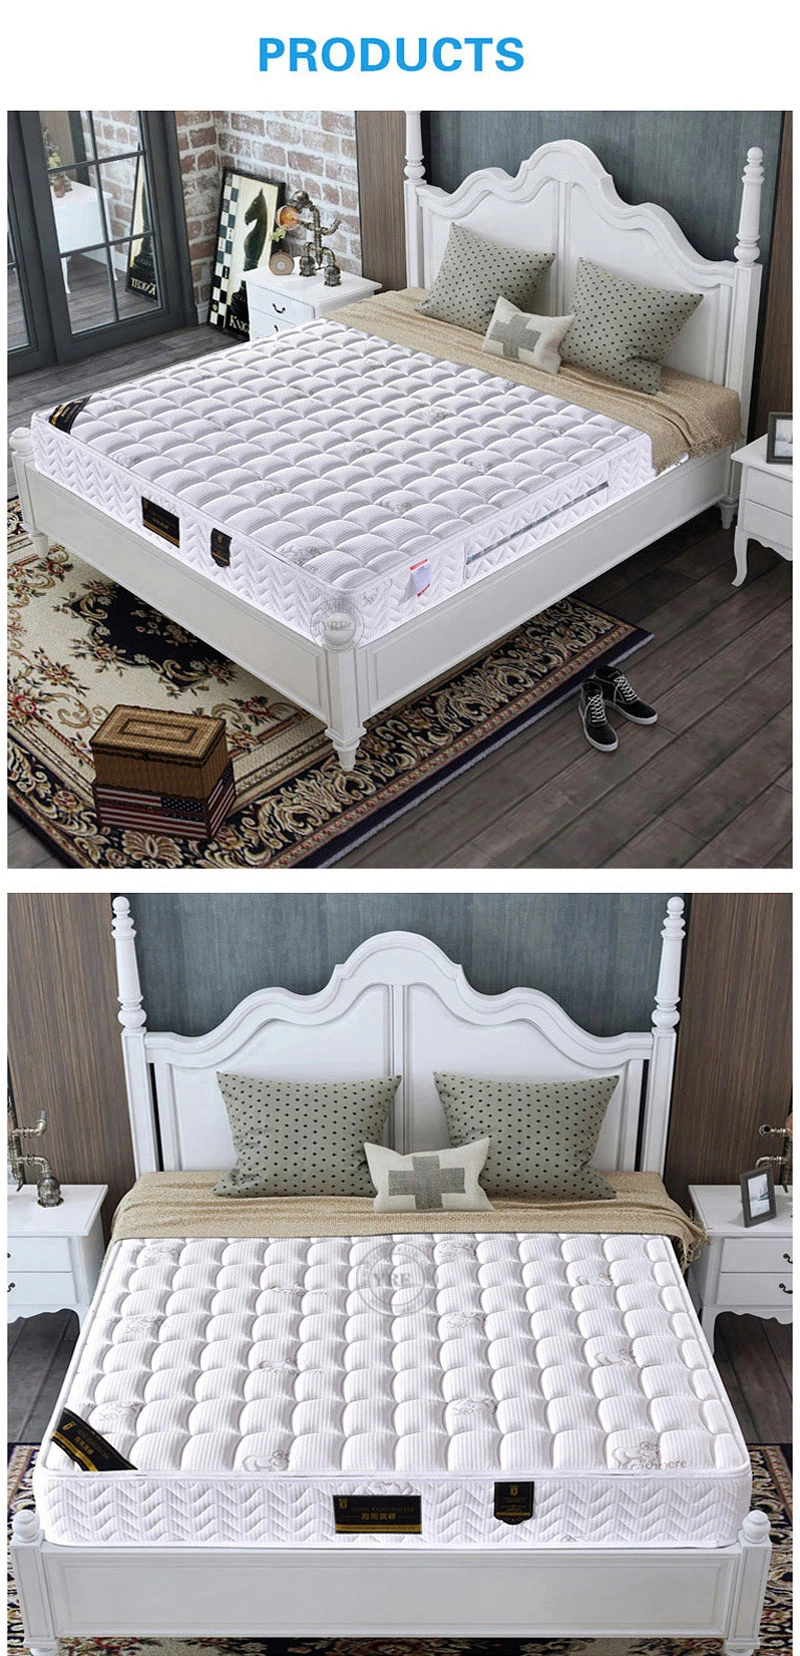 Factory Price Innerspring Sheraton Hotels Queen Bed Mattress for Bedroom Furniture